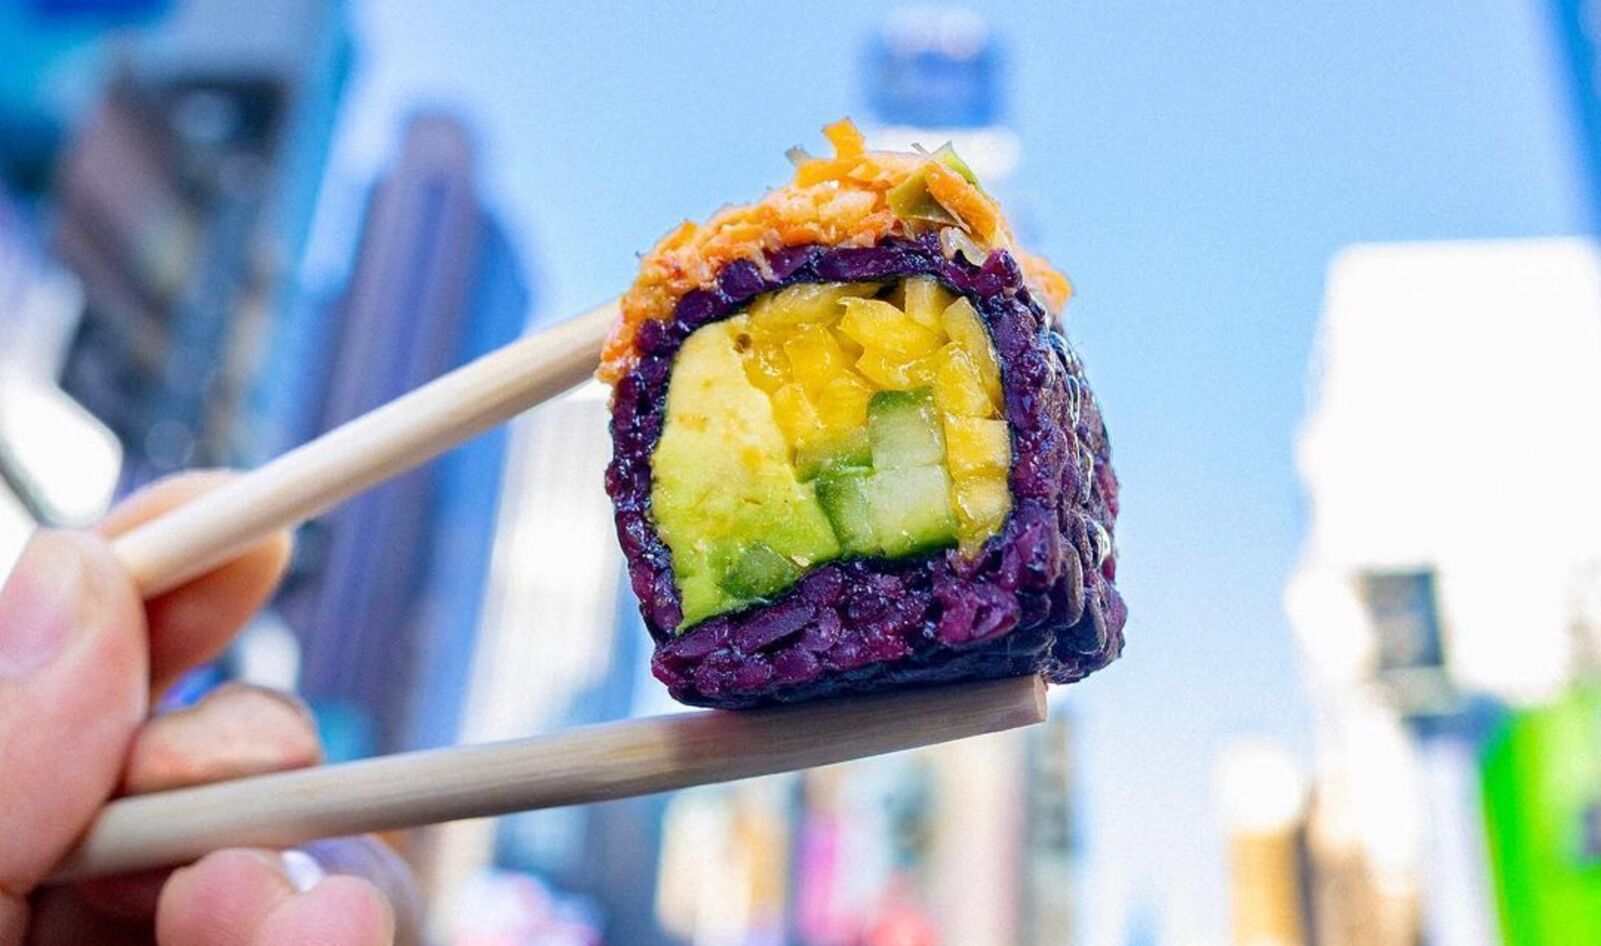 These 13 Restaurants in the US Serve Up Some of the Best Sushi—Hold the Fish